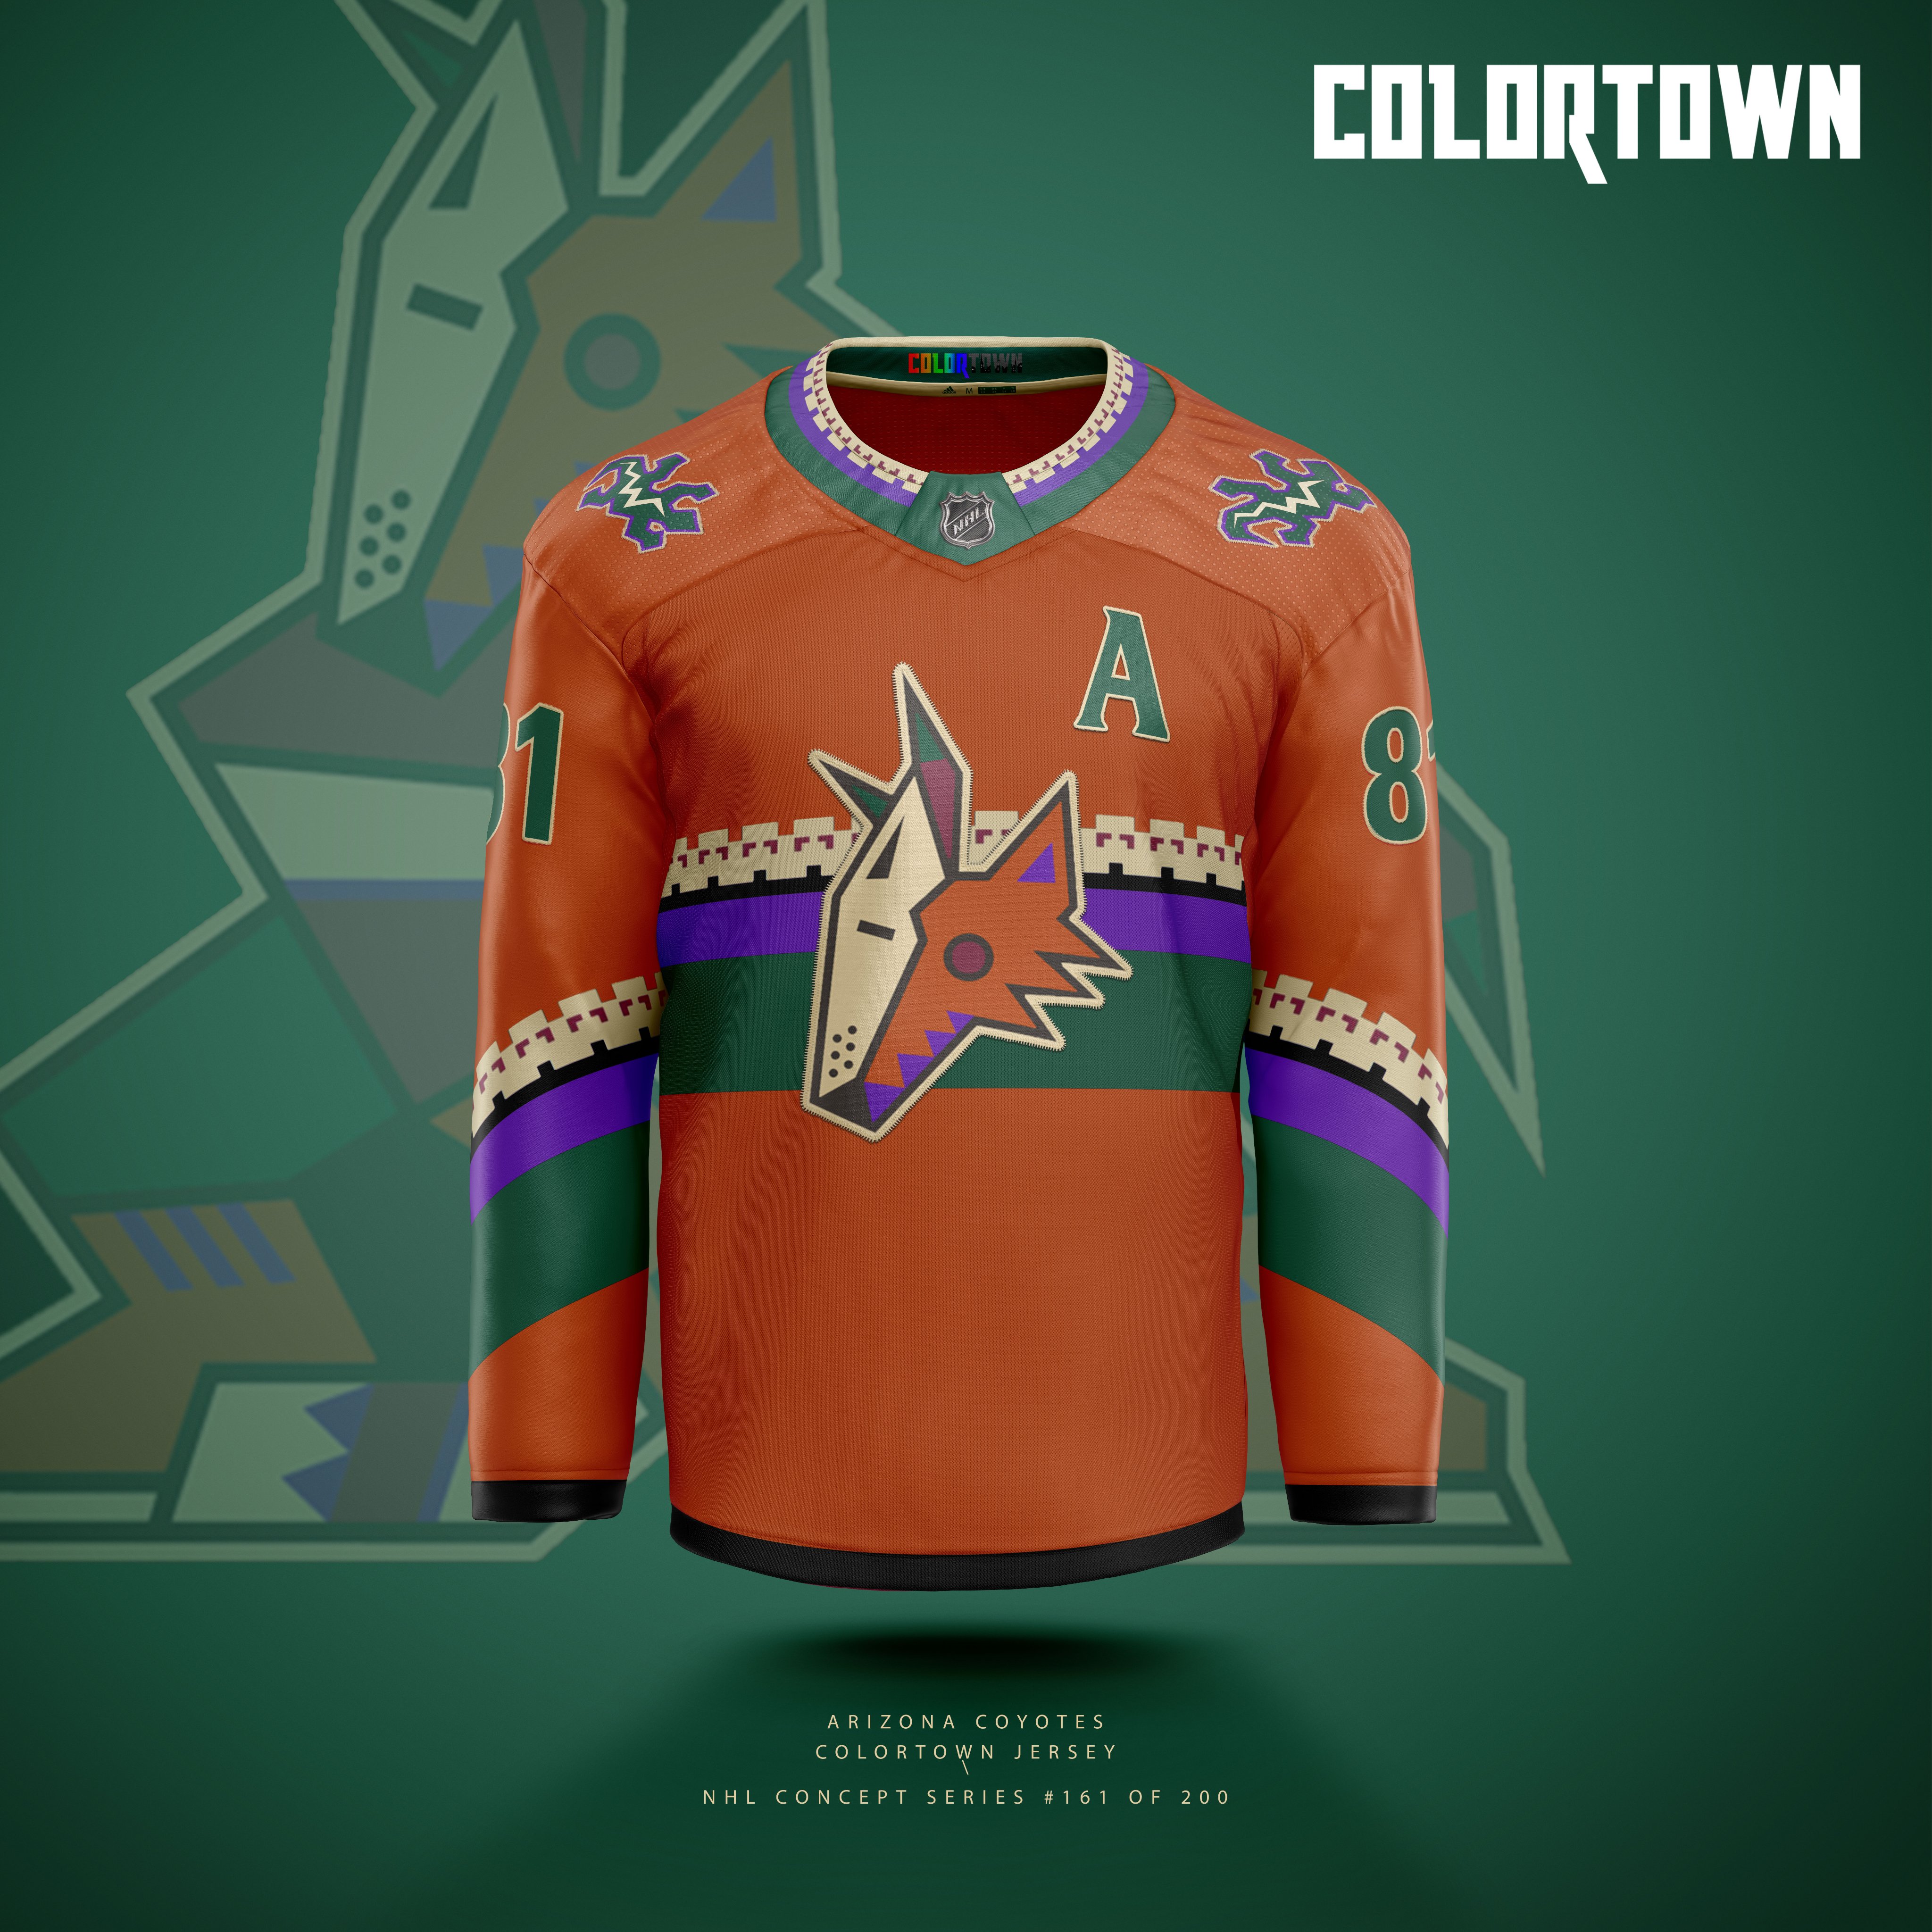 Z89Design on X: The road set is the first of a few sets in my NHL series  that will use a variation of white, in this case “sand”, as the main color.